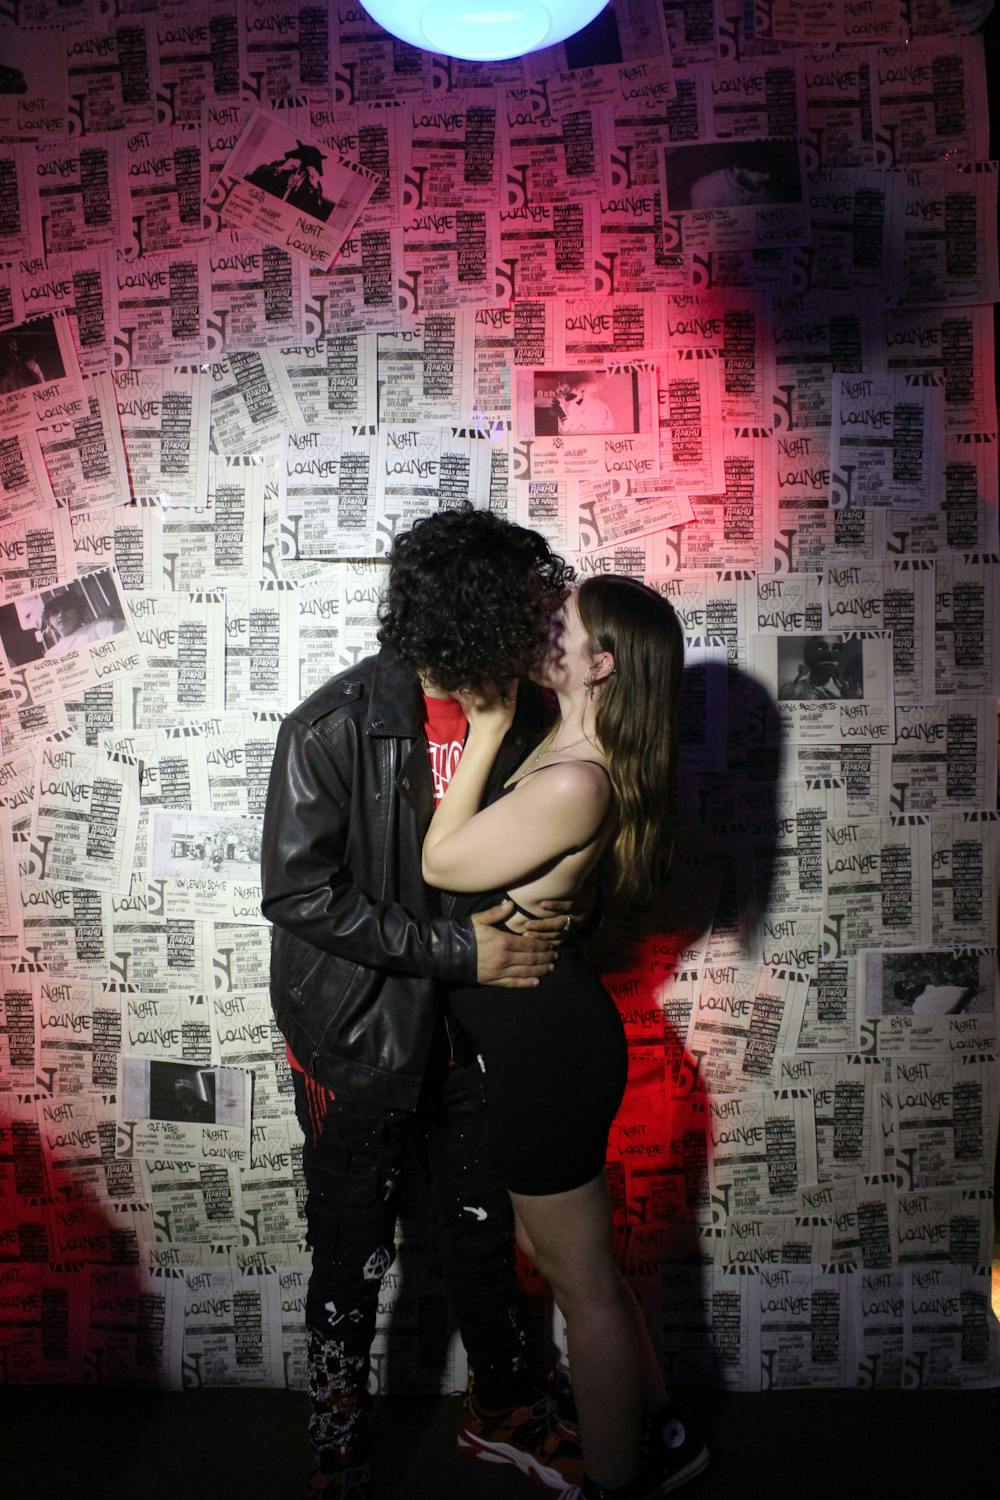 <p>Michael Corio, 20, and Desiree Kirschner, 20, kiss during the Night at Fox Lounge event Friday, May 27, 2022. </p>